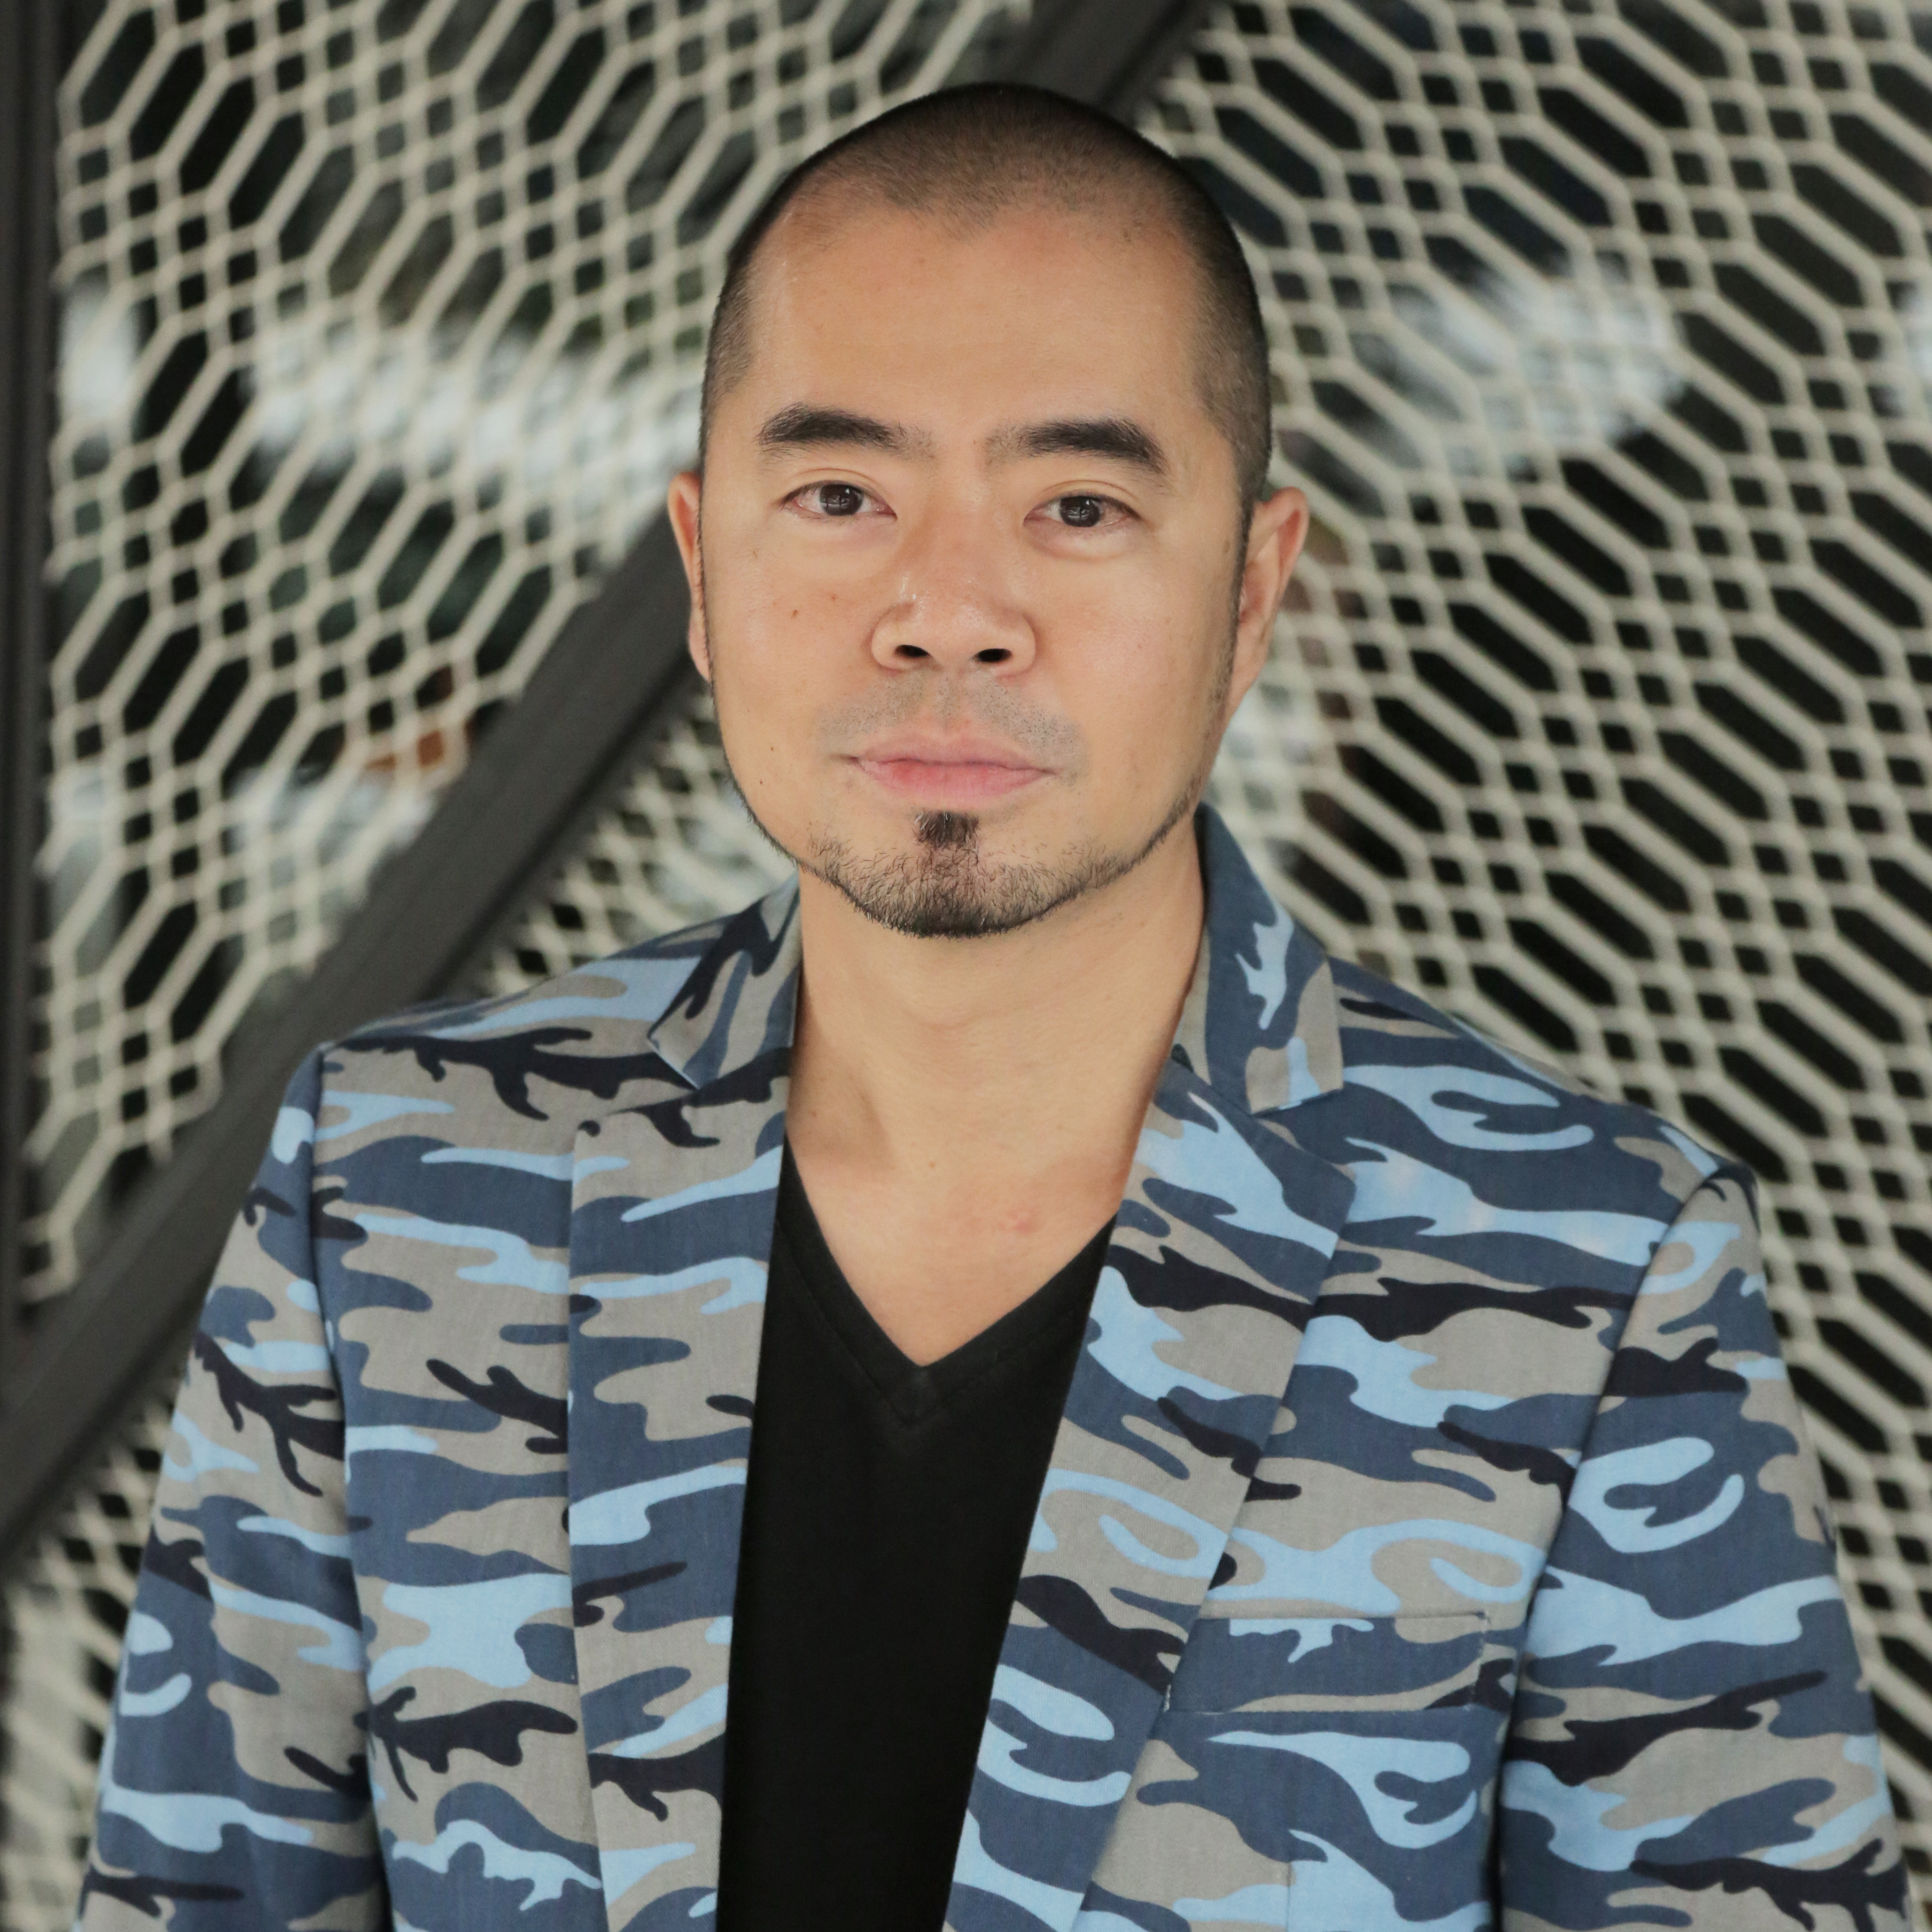 Colin Seah, founder and design director of Ministry of Design